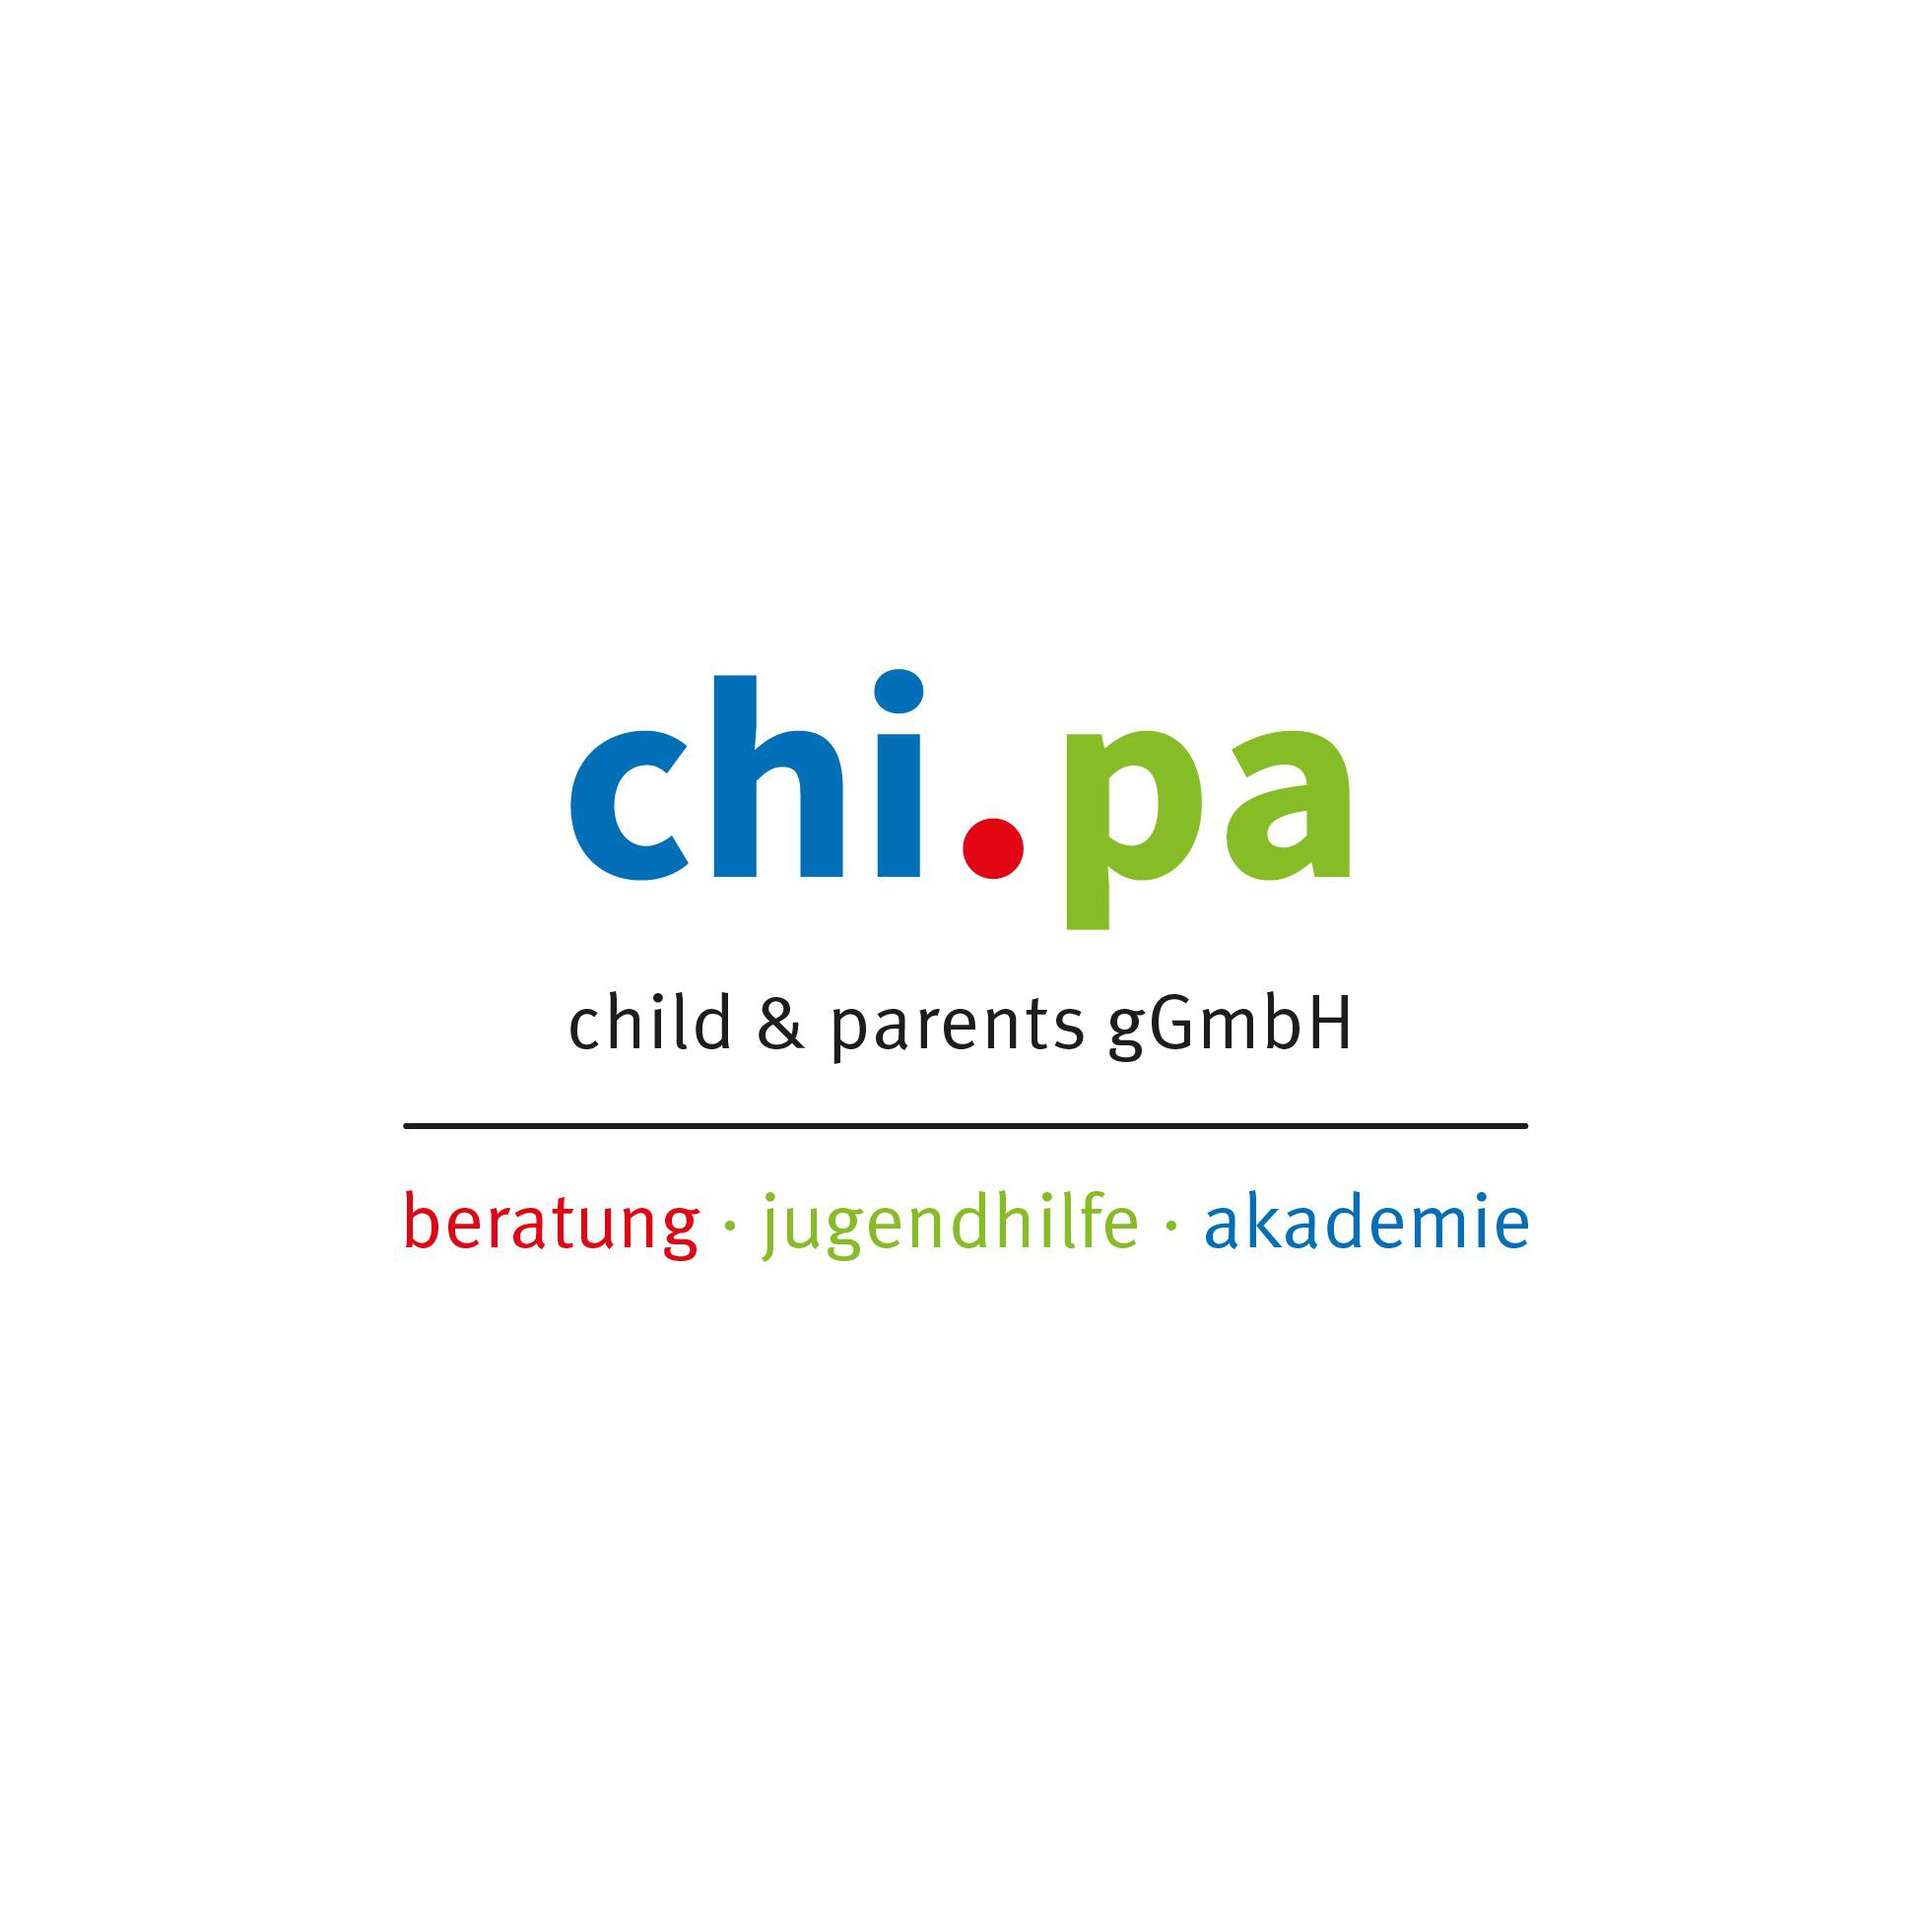 chi.pa child & parents gGmbH in Hannover - Logo